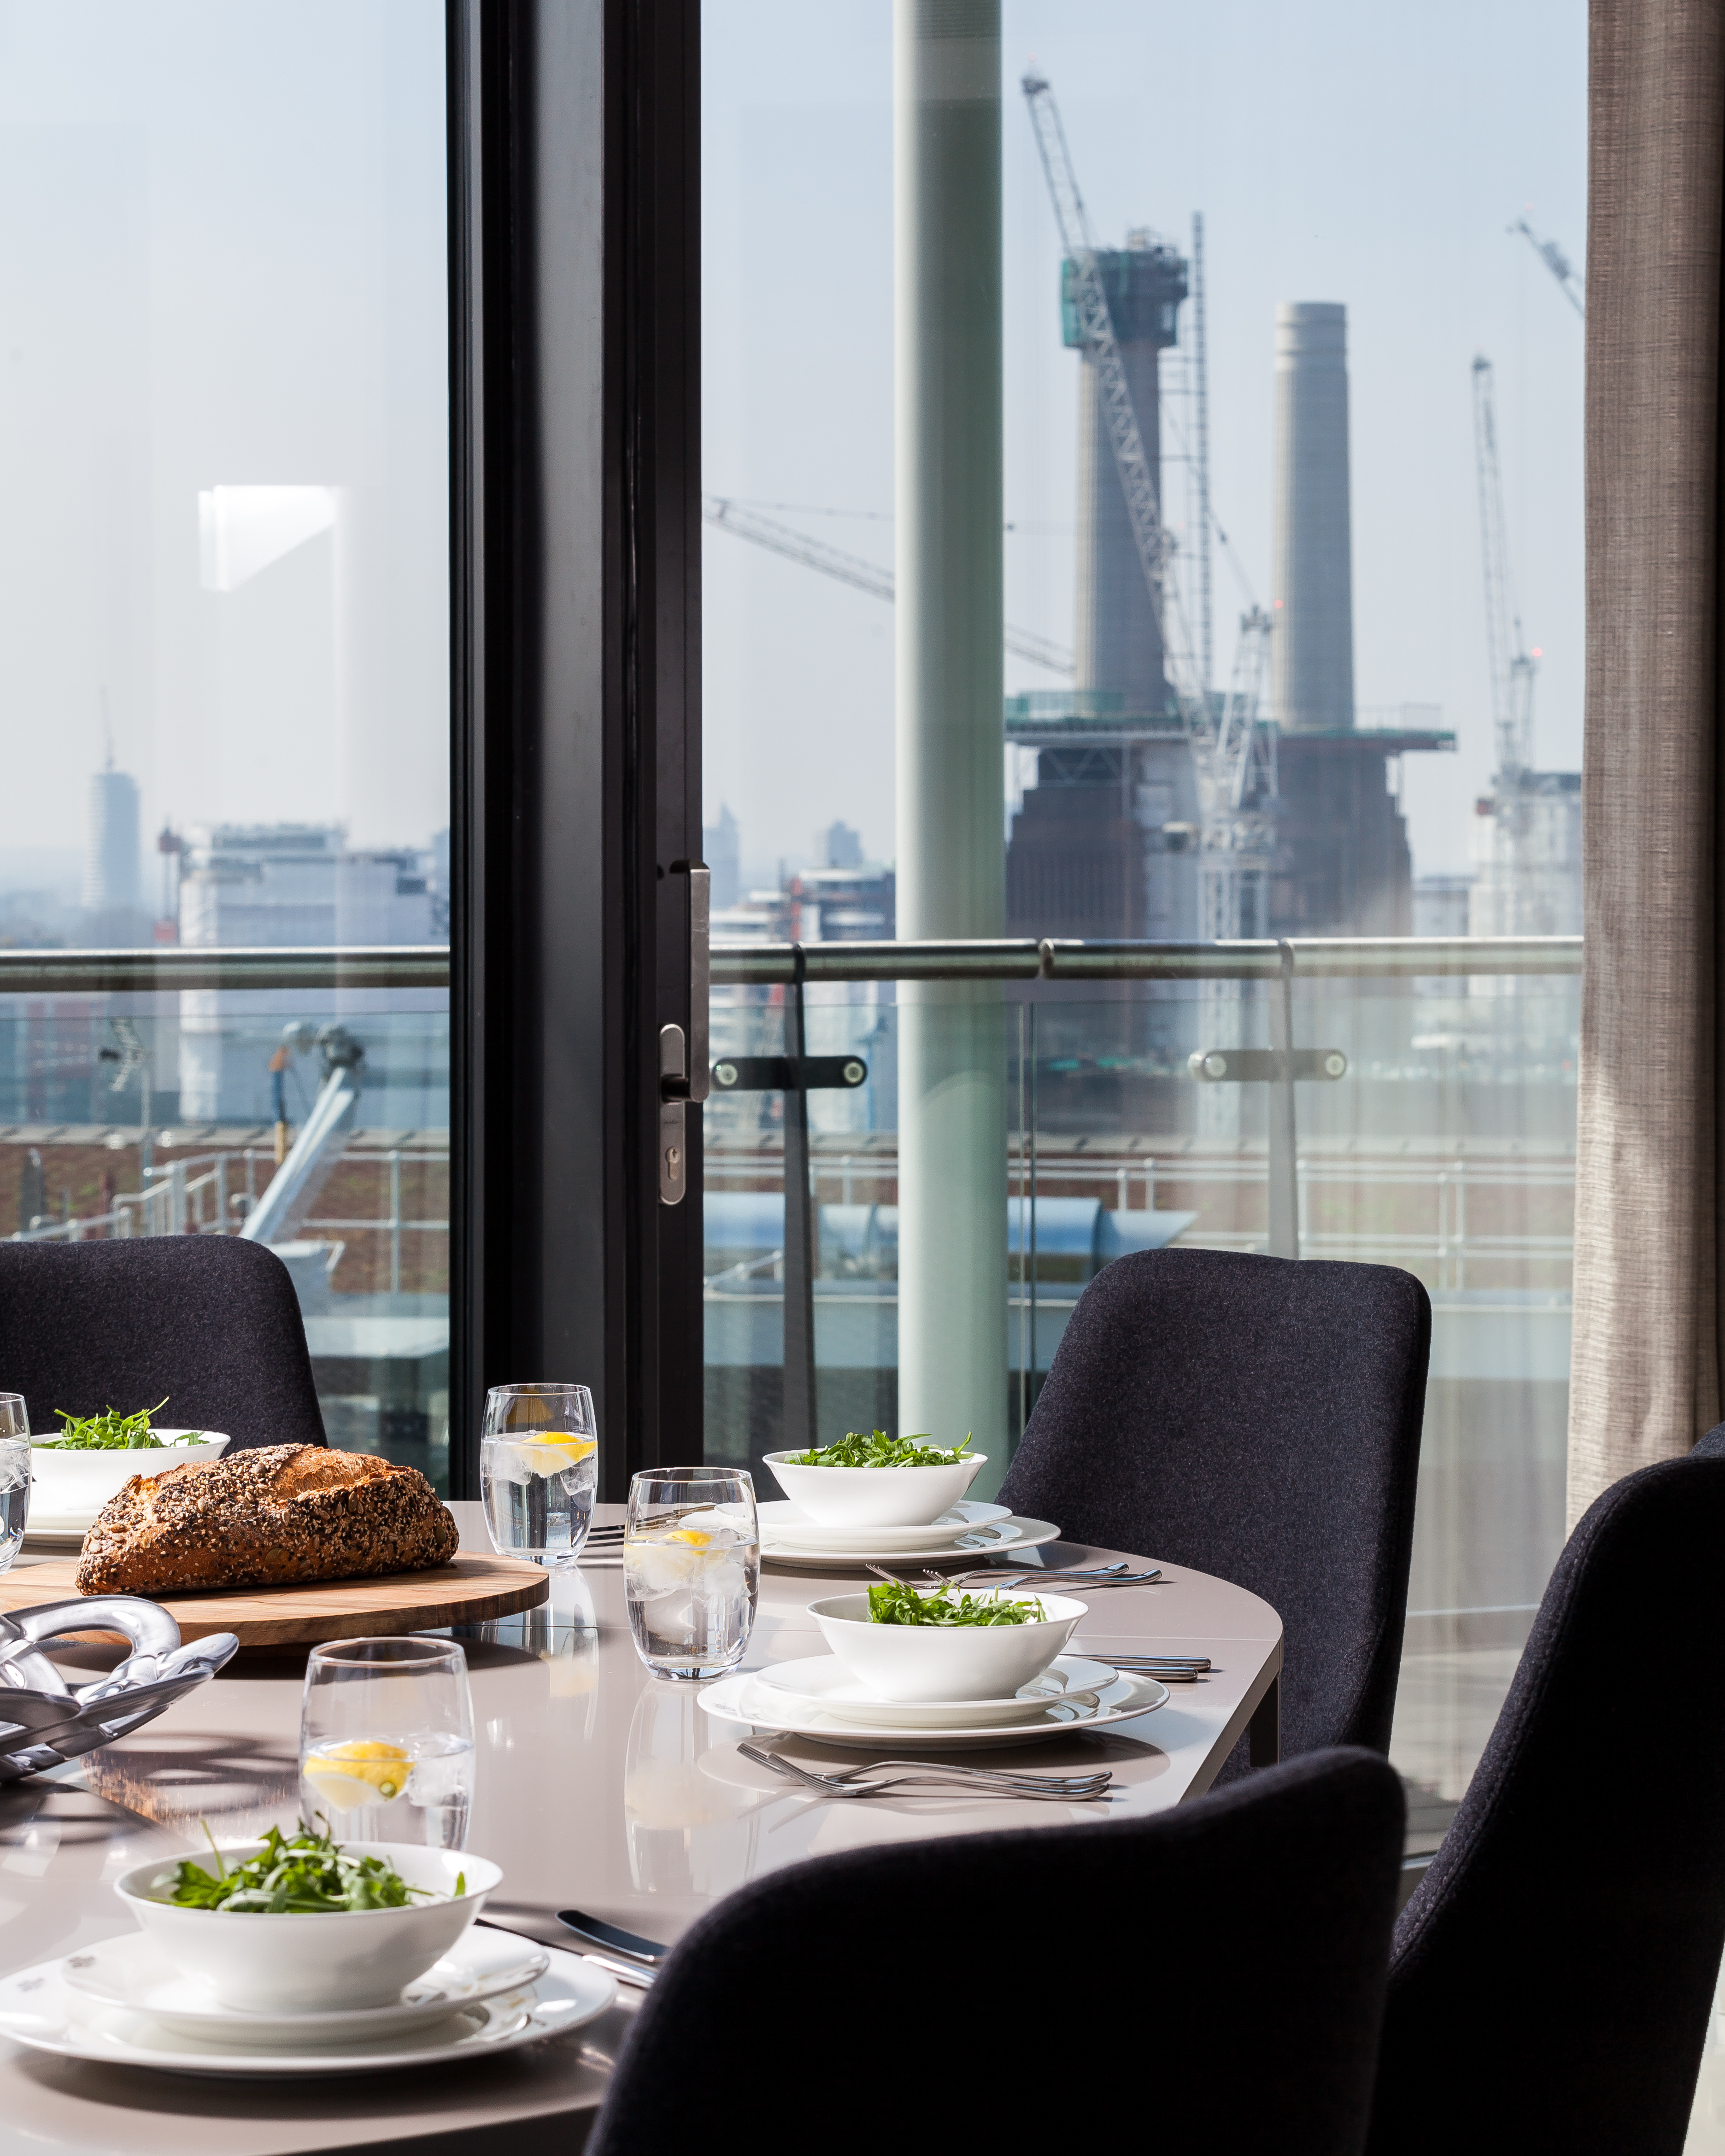 Dining overlooking Battersea Power Station